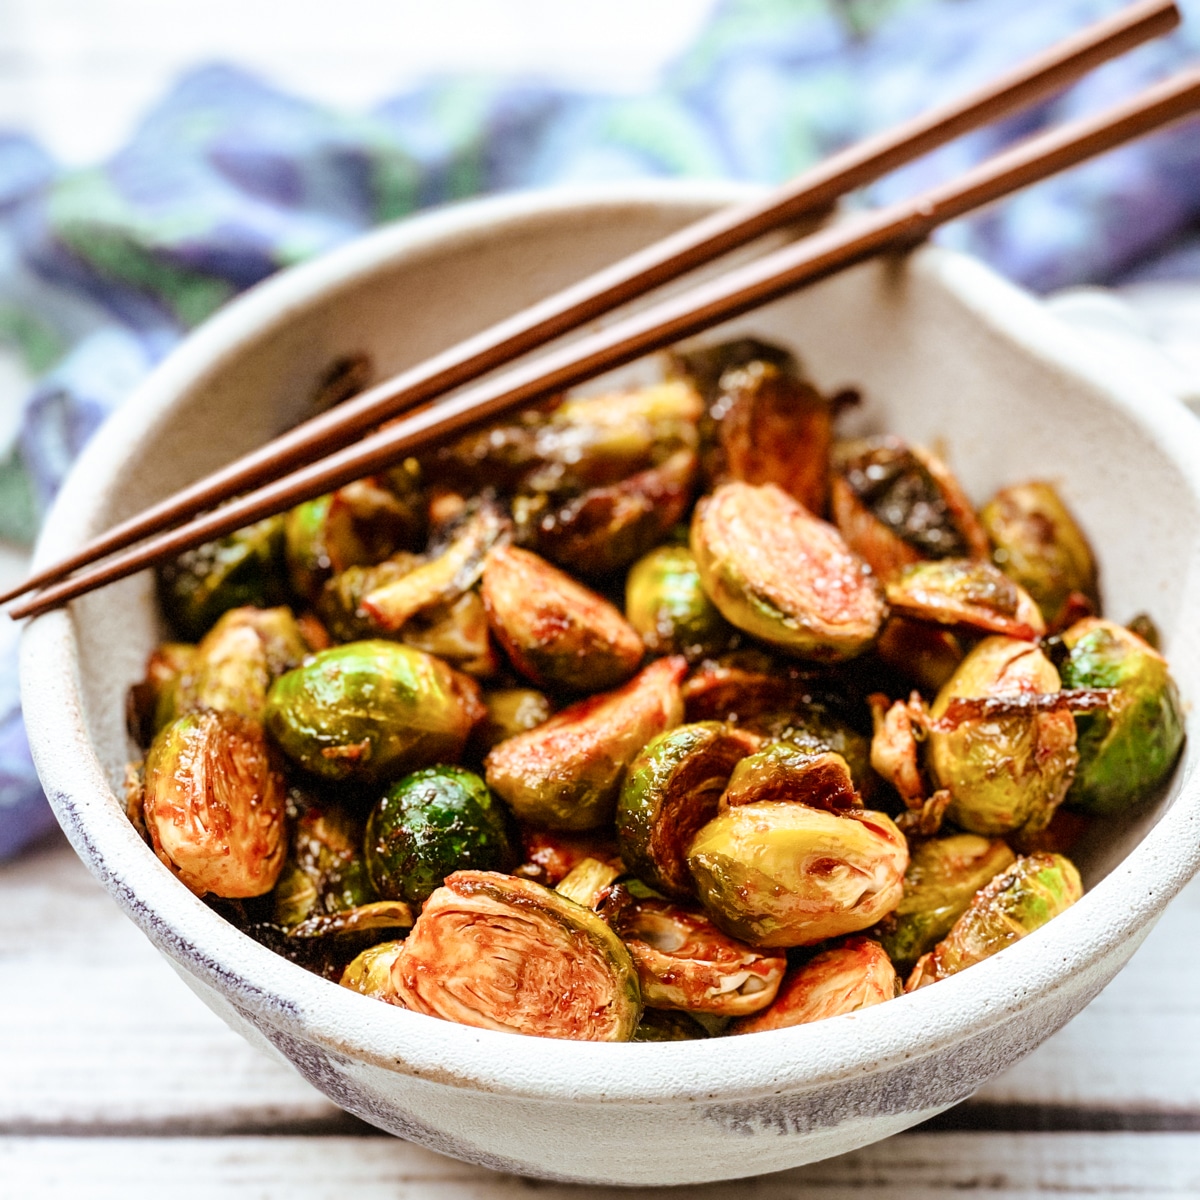 Air fryer brussels sprouts with gochujang in a white bowl topped with chopsticks with a blue napkin on the side.